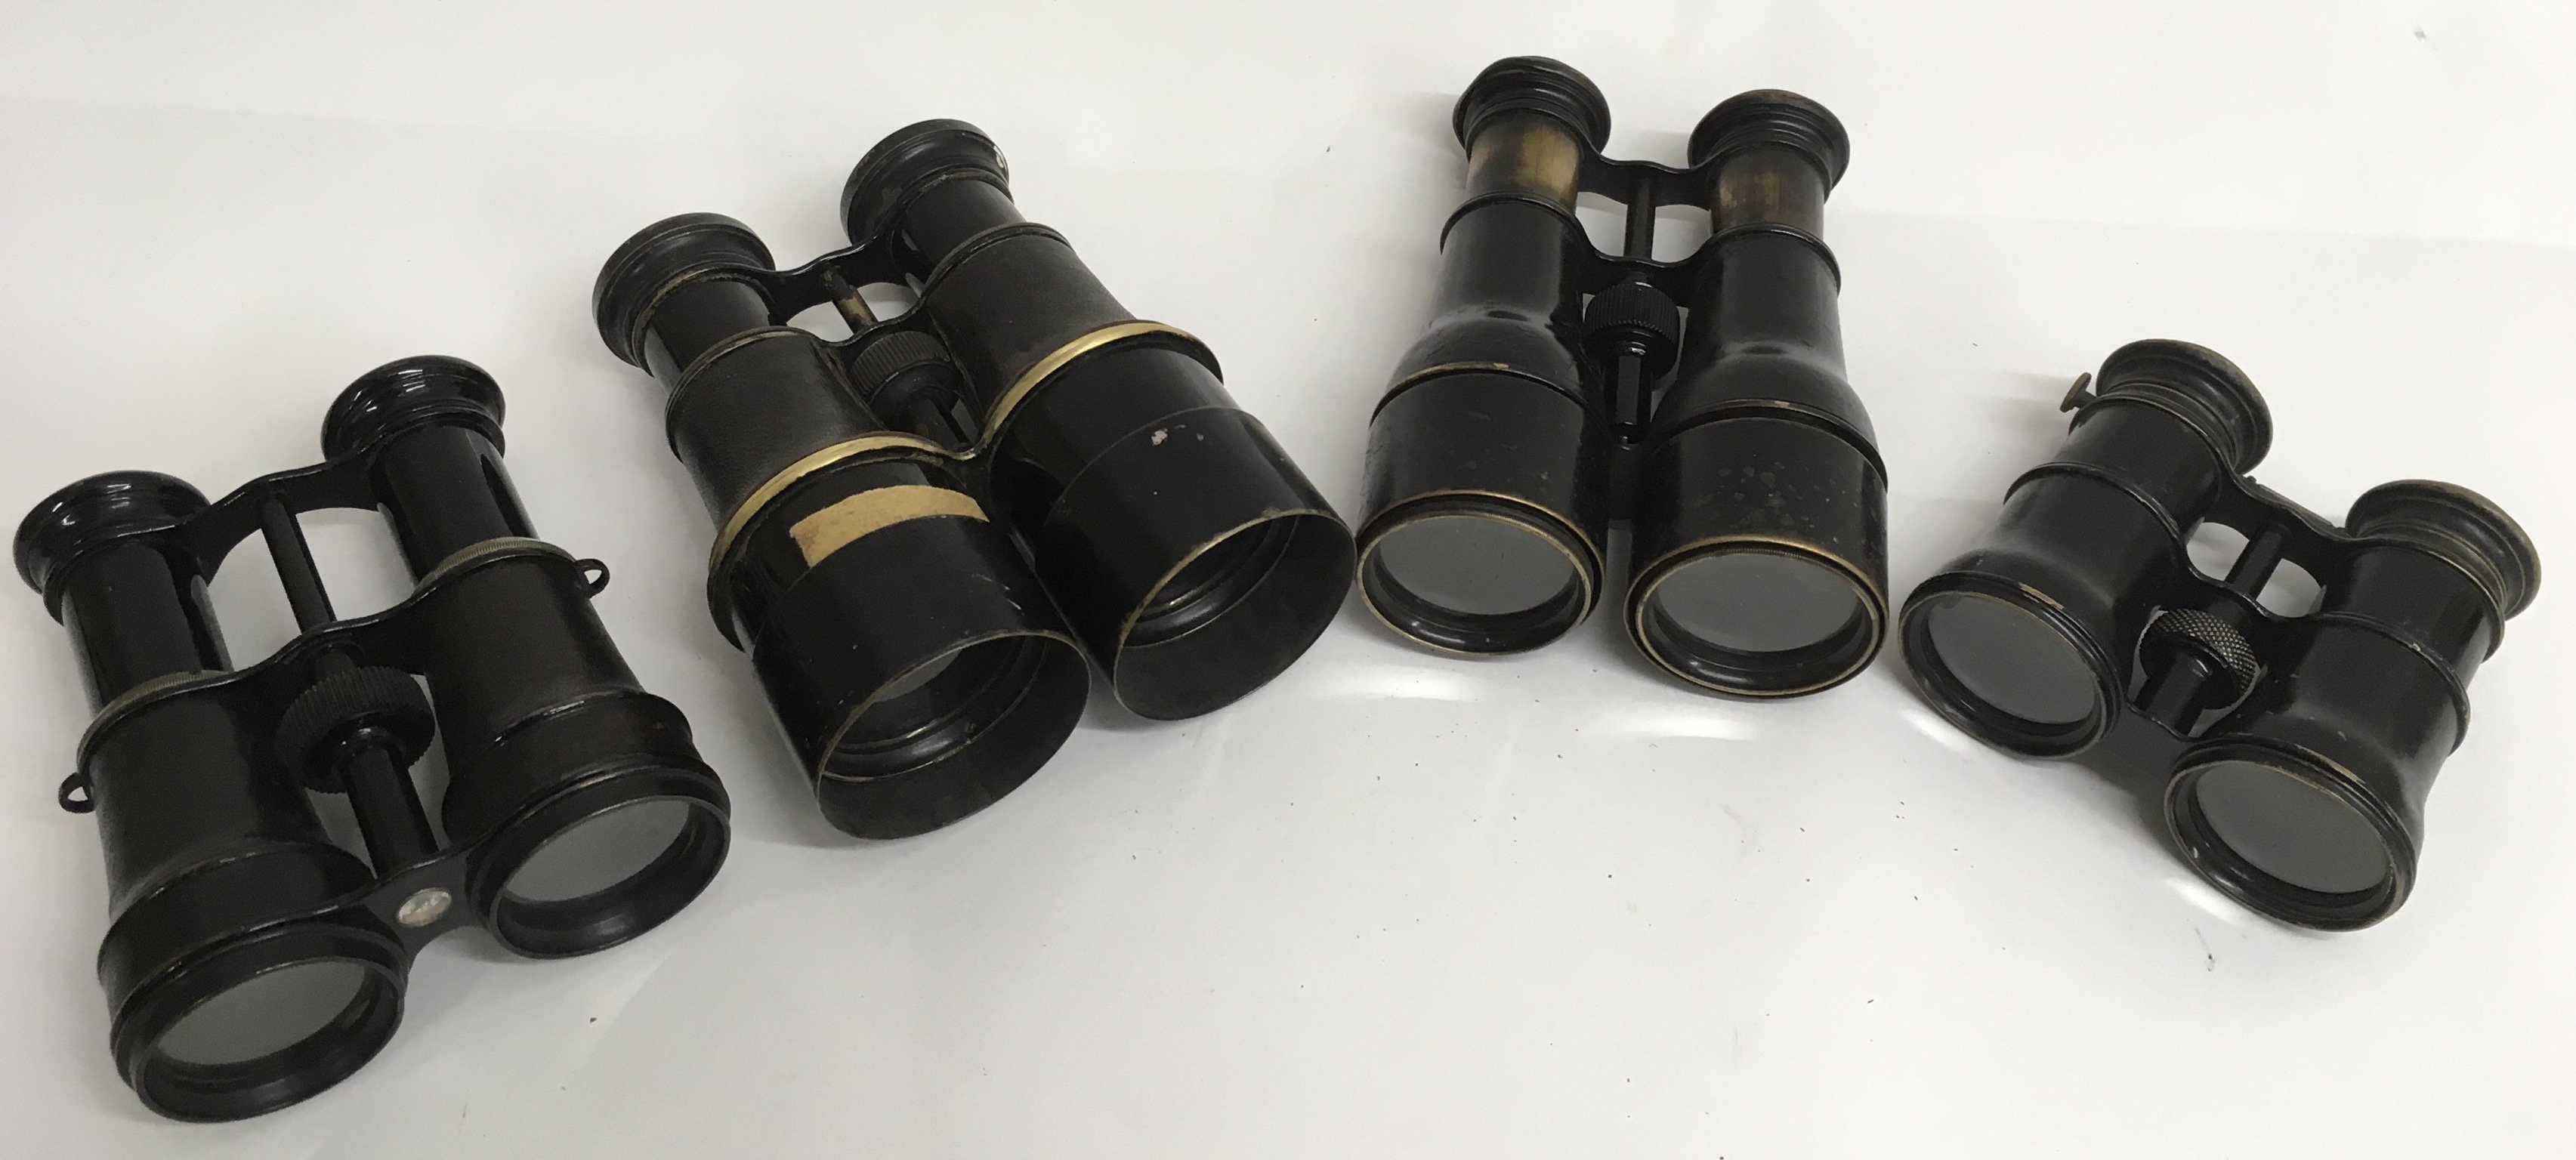 Four pairs of vintage binoculars including one pai - Image 2 of 2